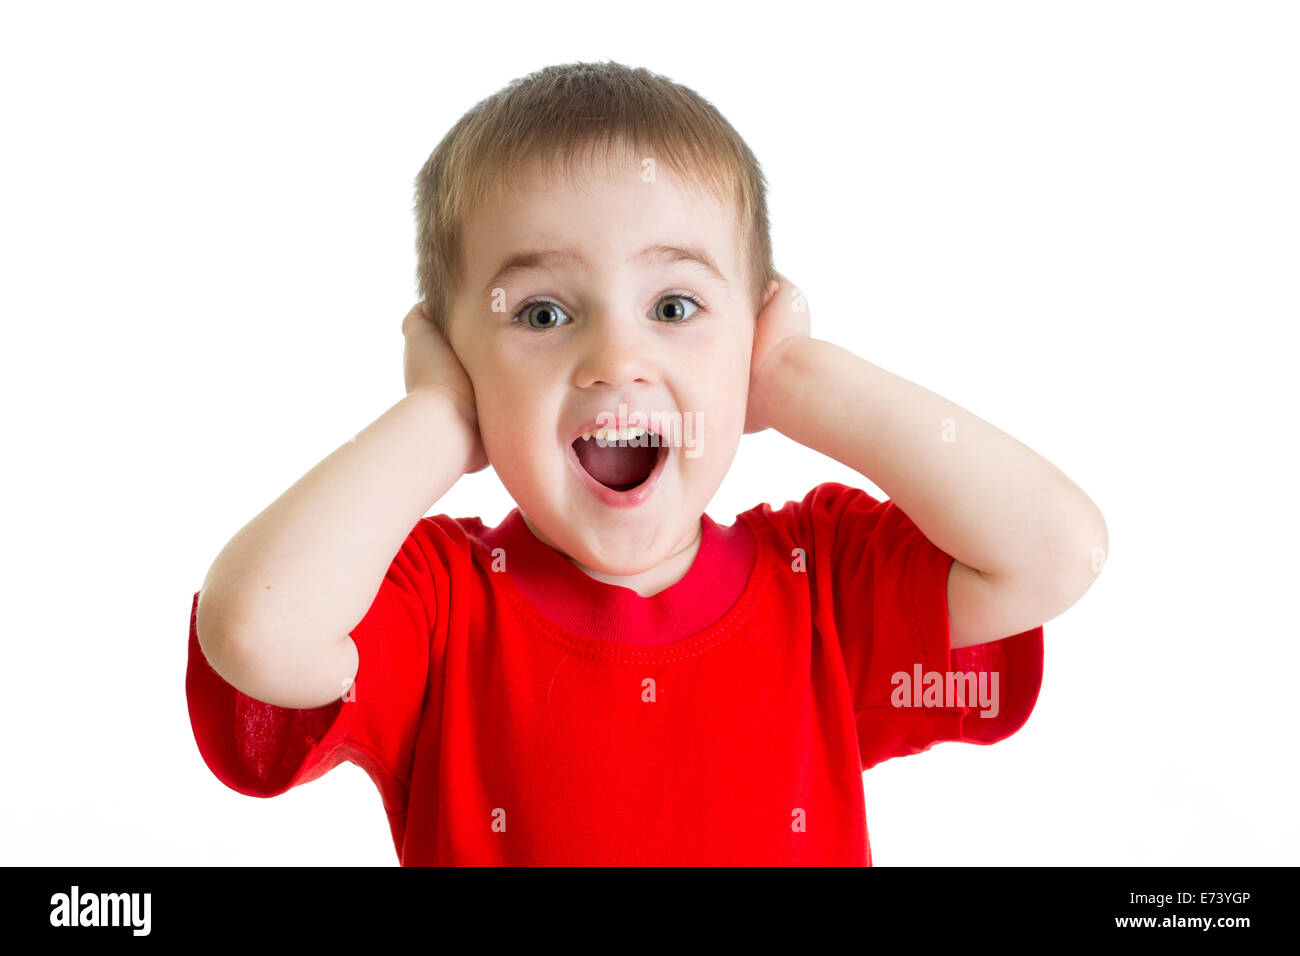 Surprised little boy portrait in red tshirt isolated Stock Photo